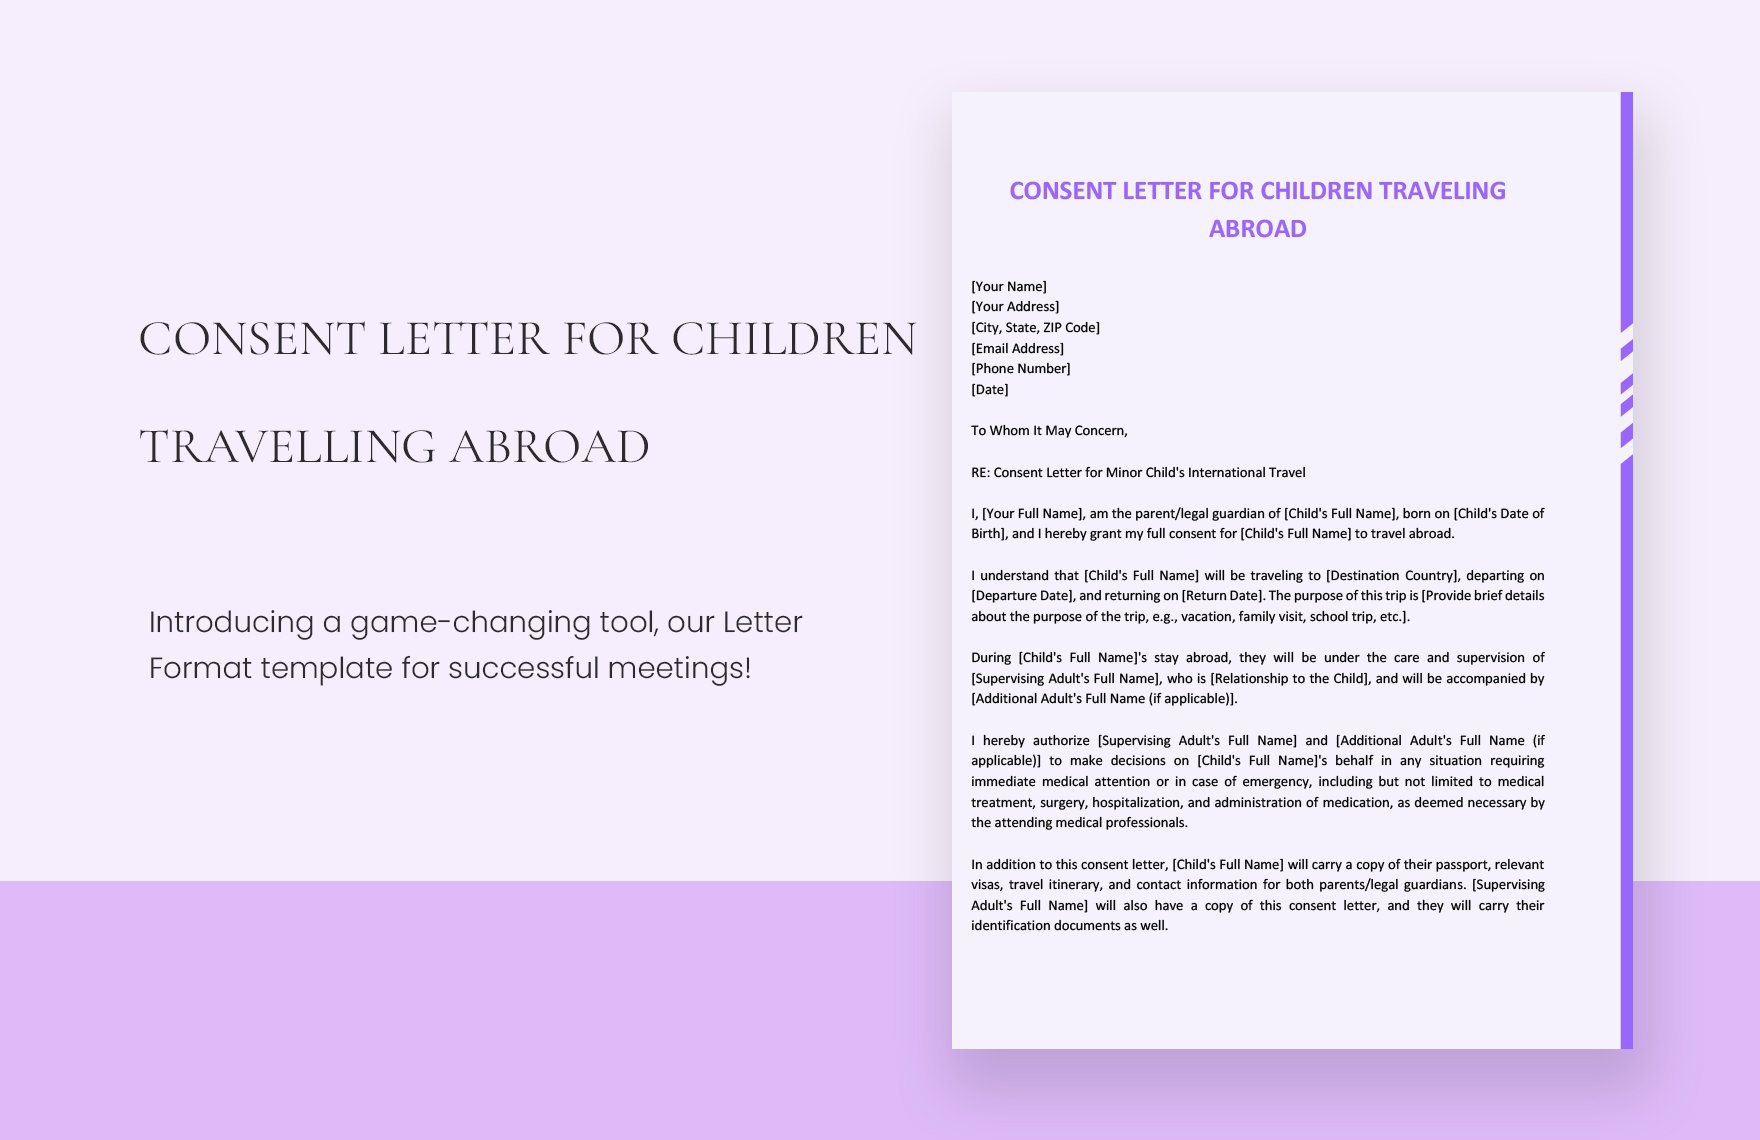 Consent Letter For Children Travelling Abroad in Word, Google Docs, PDF, Apple Pages